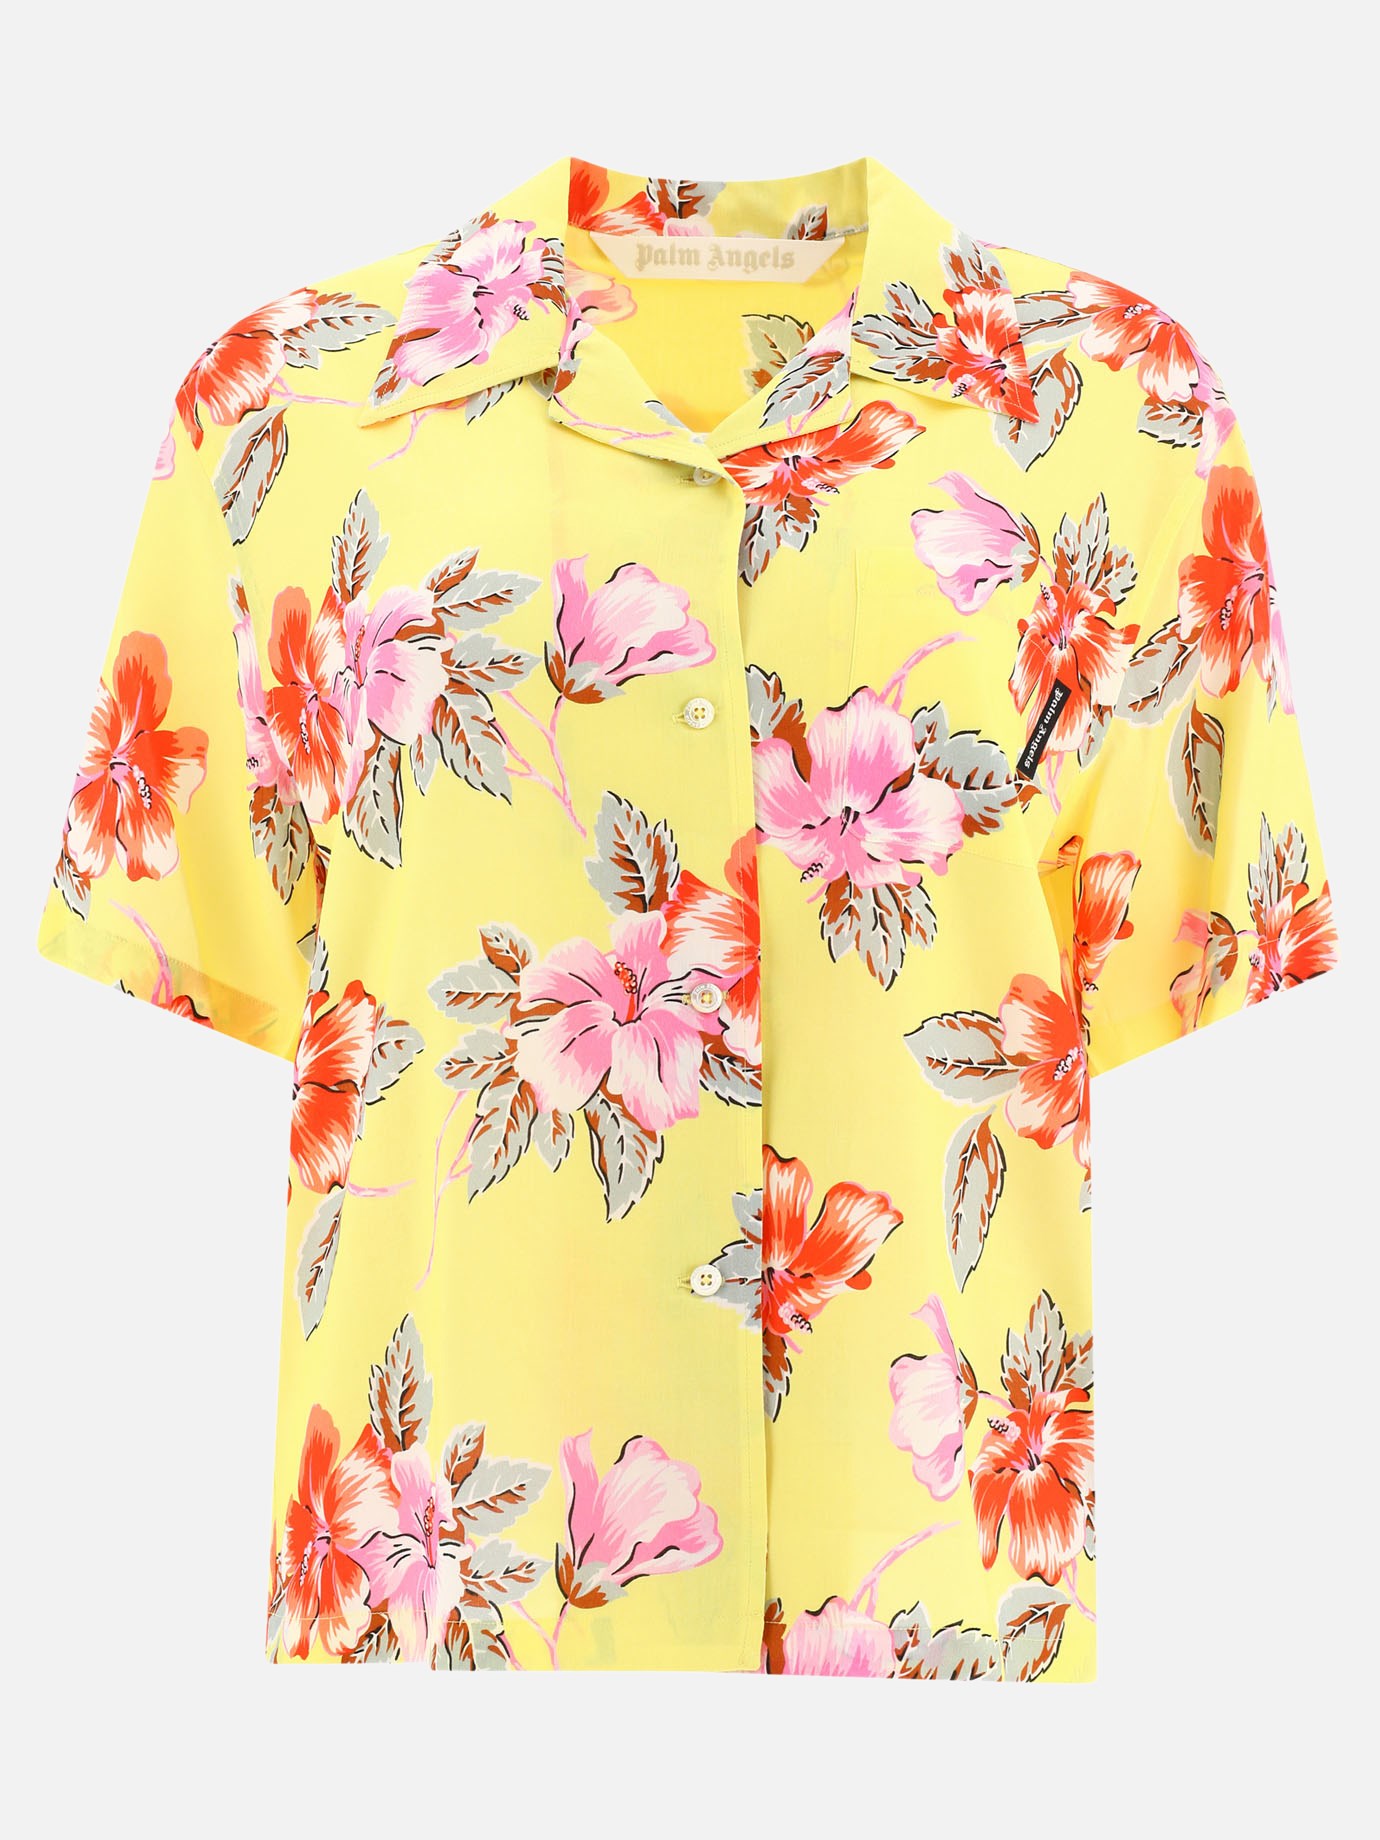  Hibiscus  shirtby Palm Angels - 0